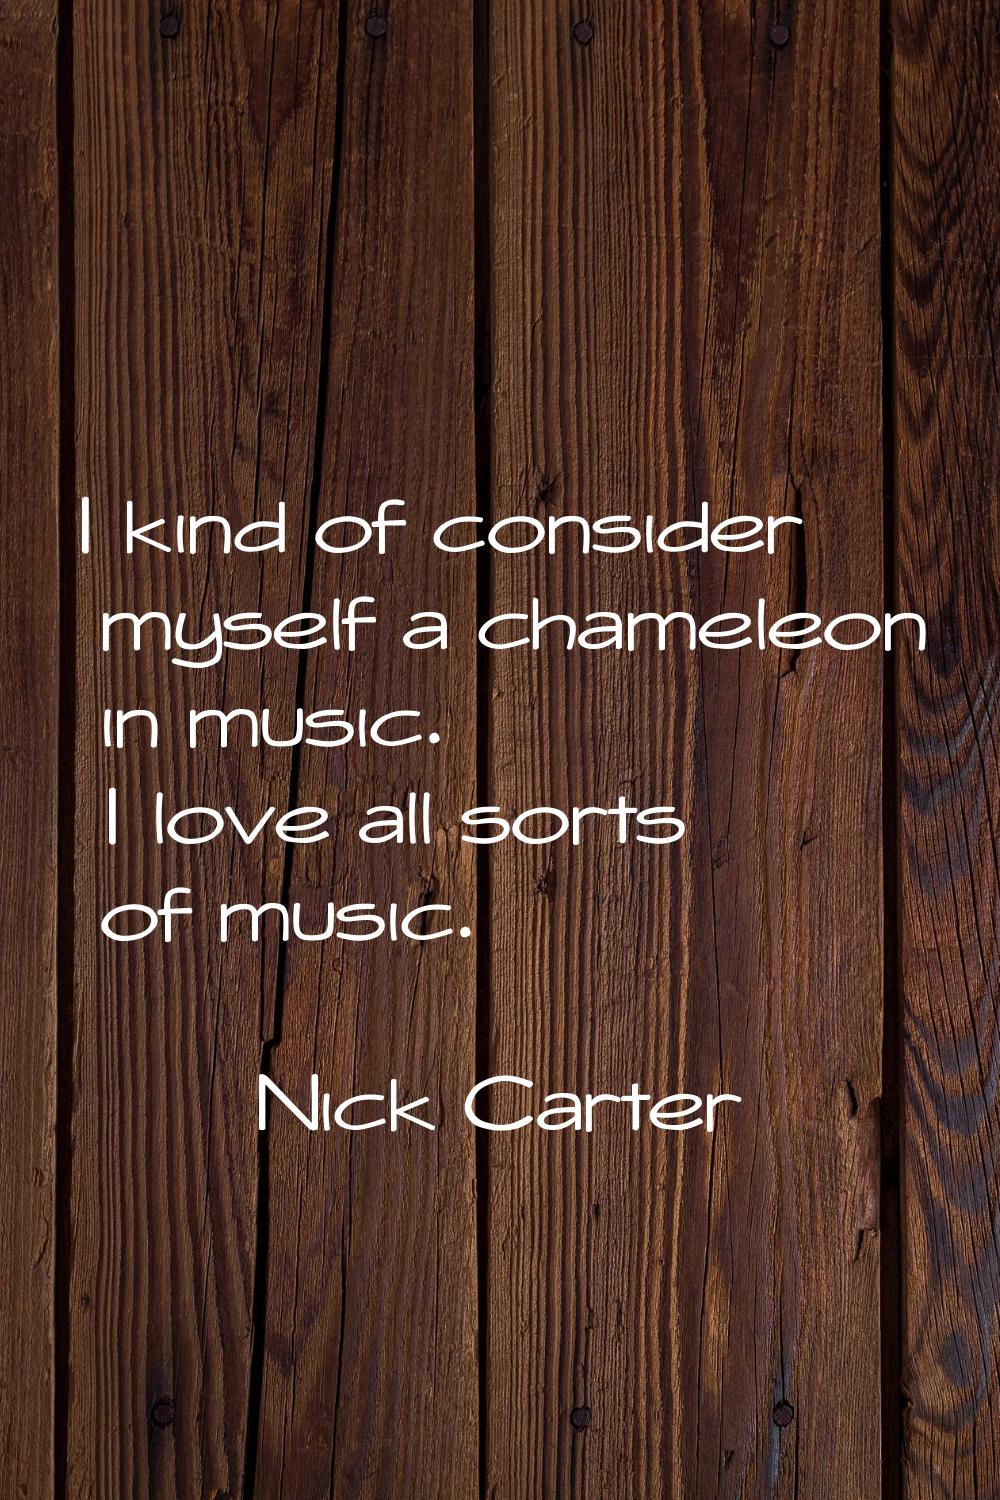 I kind of consider myself a chameleon in music. I love all sorts of music.